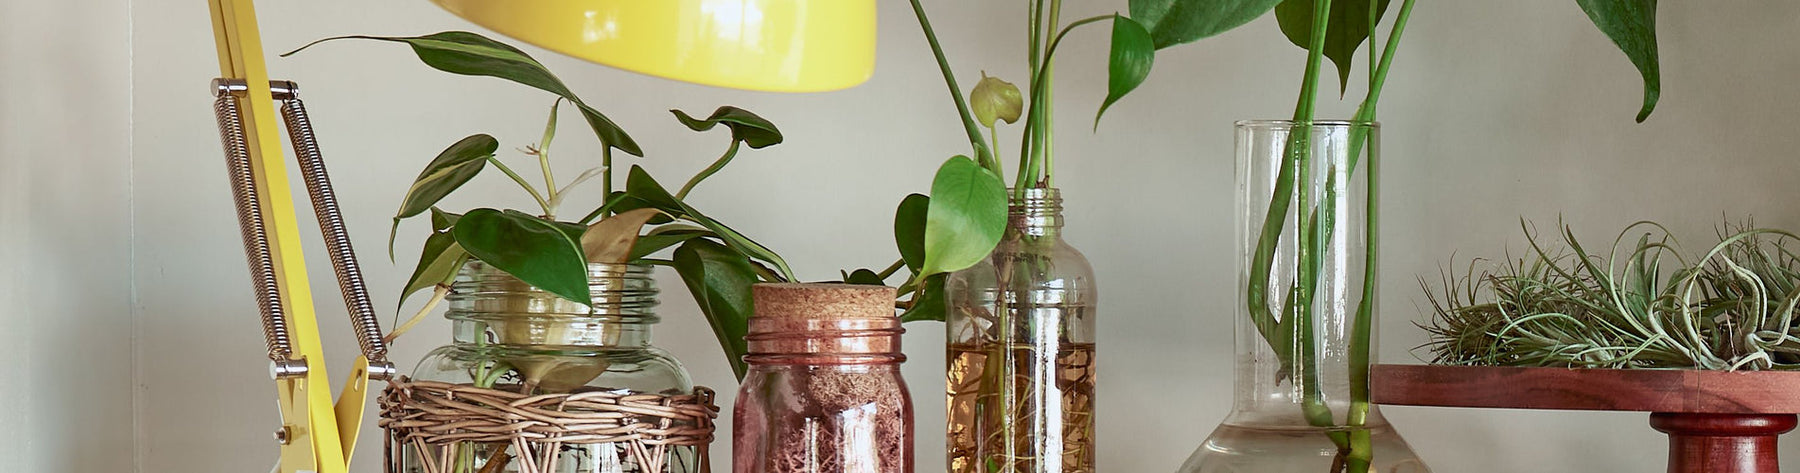 12 Houseplants for a Healthy Home.